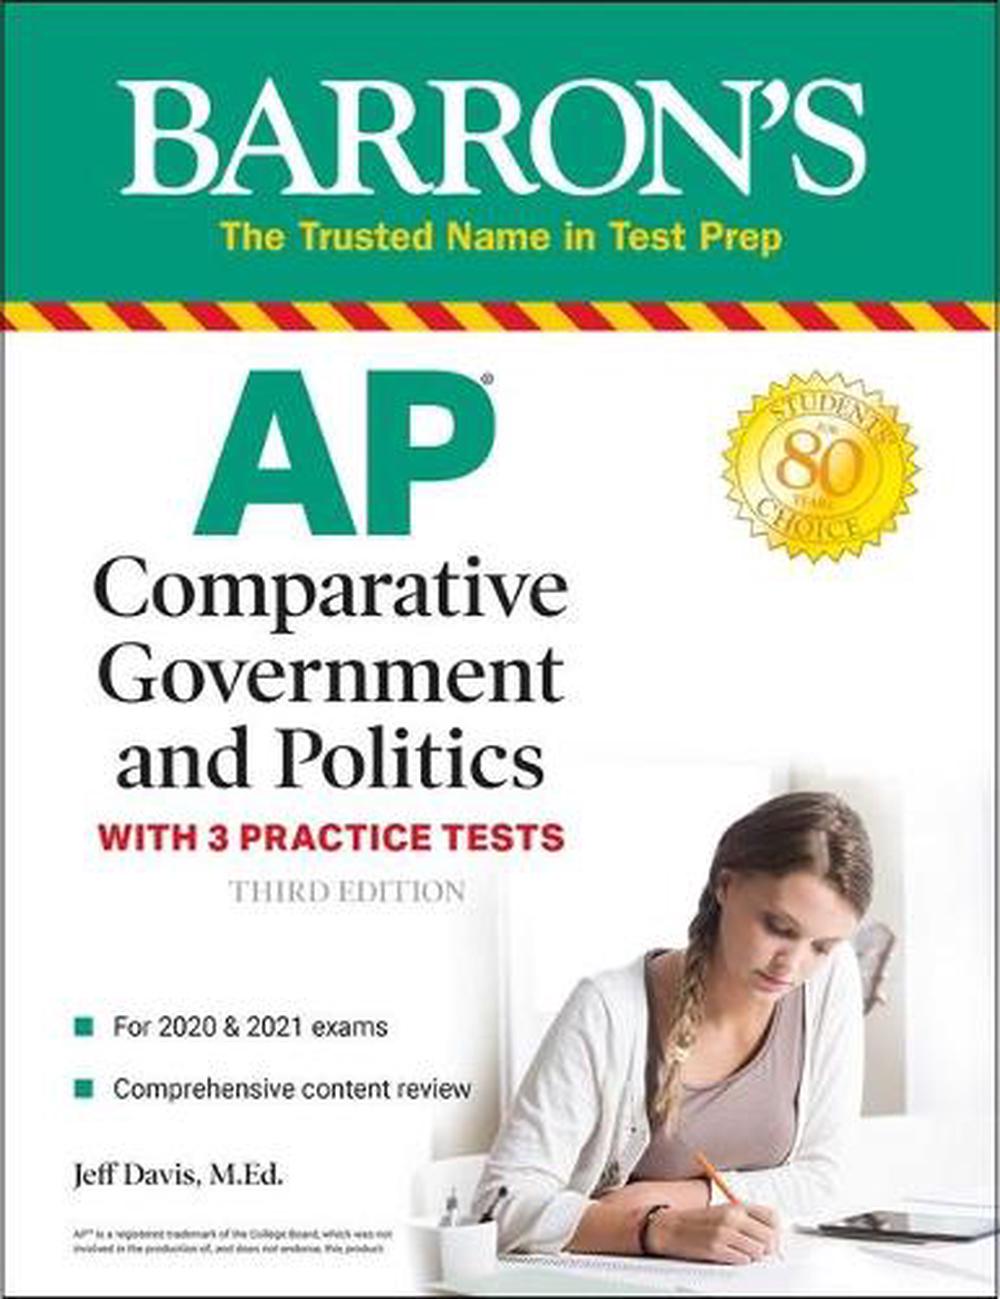 AP Comparative Government and Politics With 3 Practice Tests by Jeff